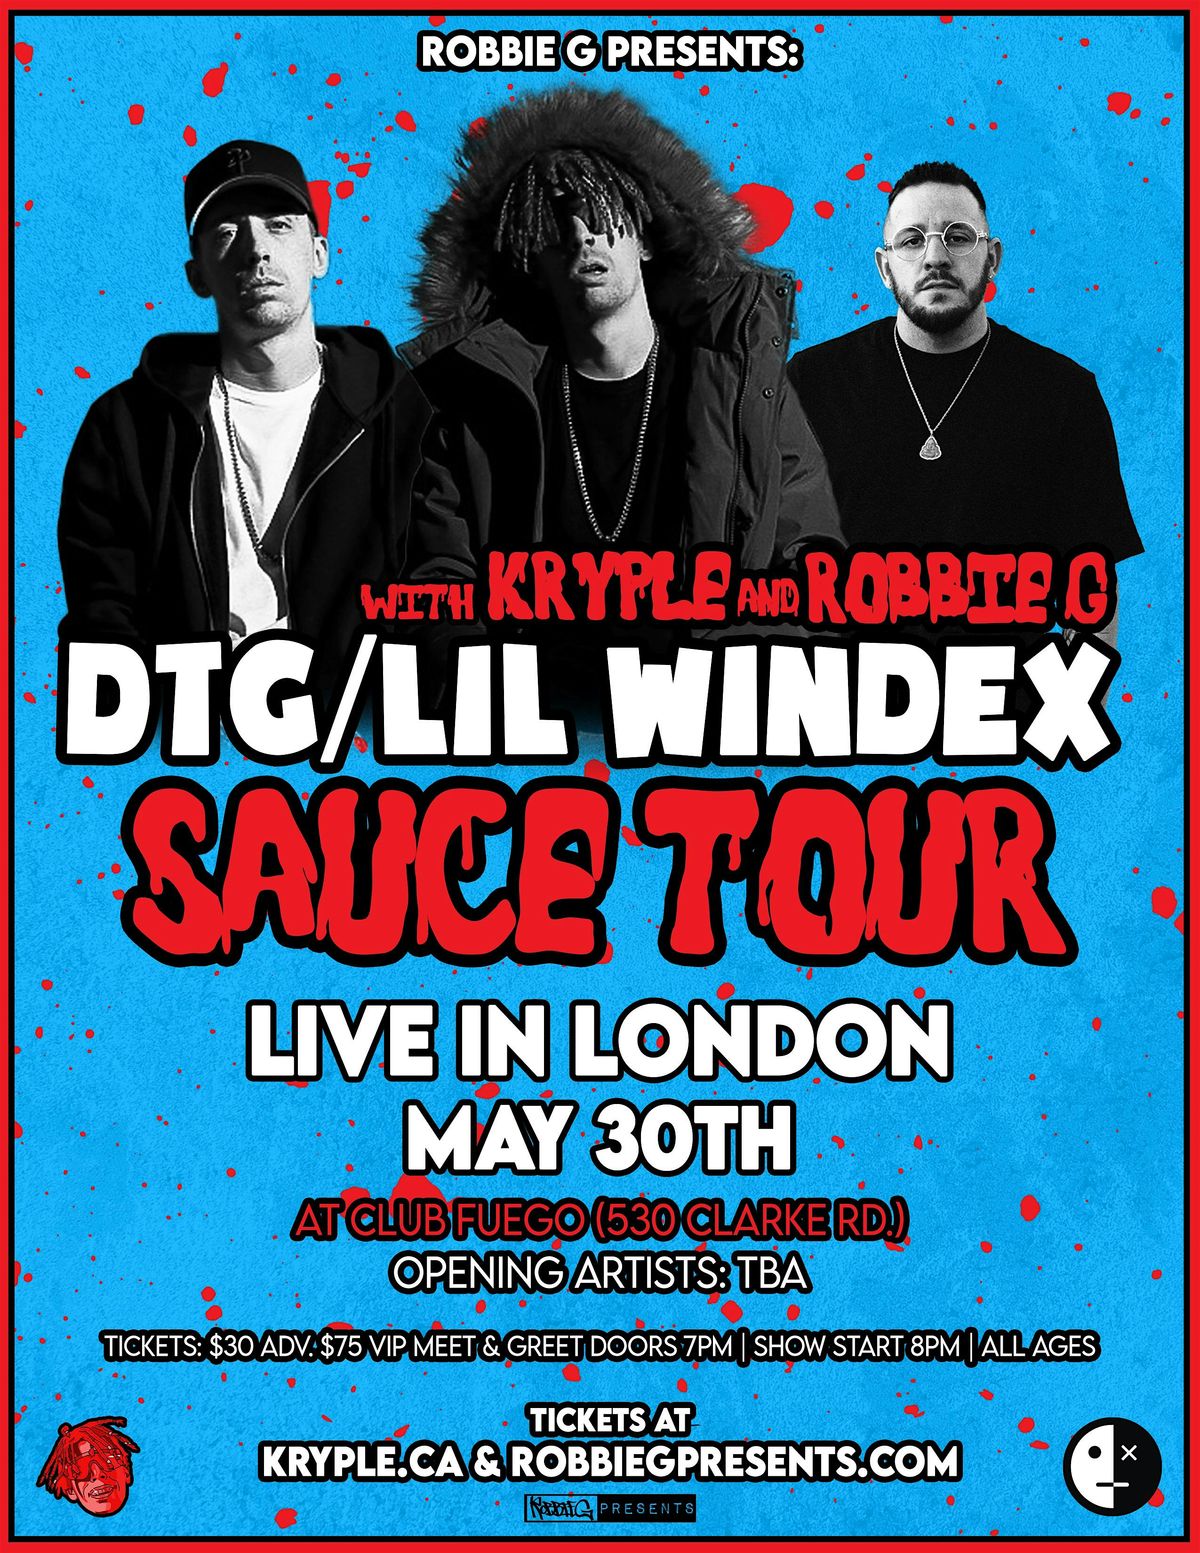 DTG\/Lil Windex Live in Ottawa June 7th at Brass Monkey with Kryple